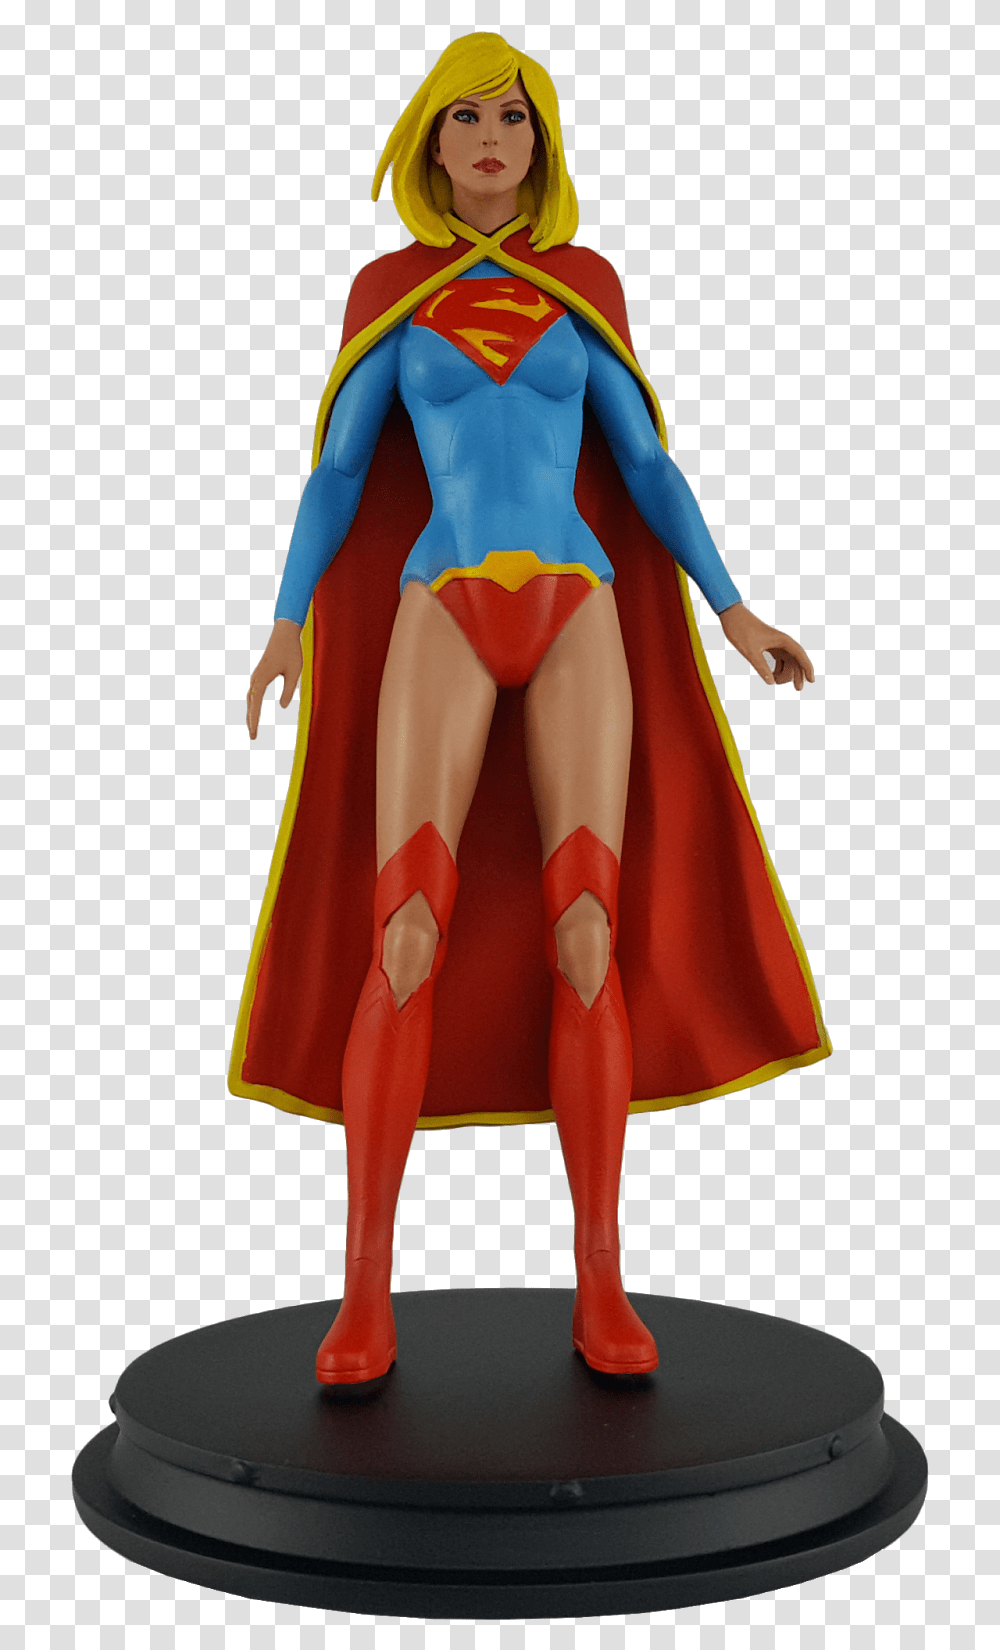 New 52 Supergirl Statue Available 4th Quarter 2019 New 52 Supergirl Statue, Clothing, Cape, Person, Figurine Transparent Png